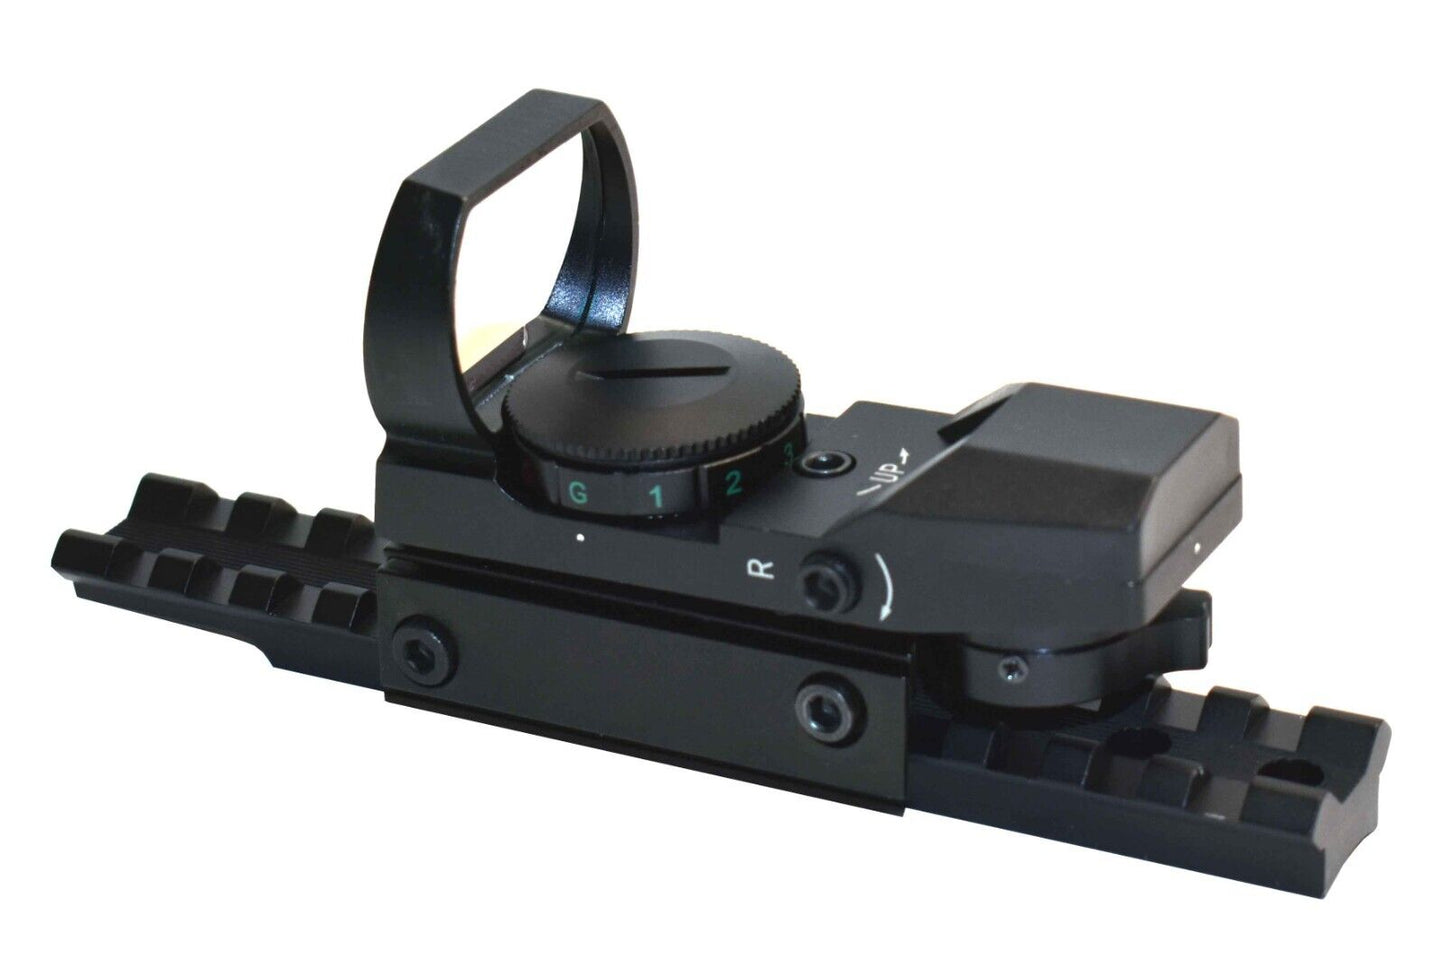 Reflex sight with base mount combo for Winchester 1300 12 gauge pump accessories hunting home defense.